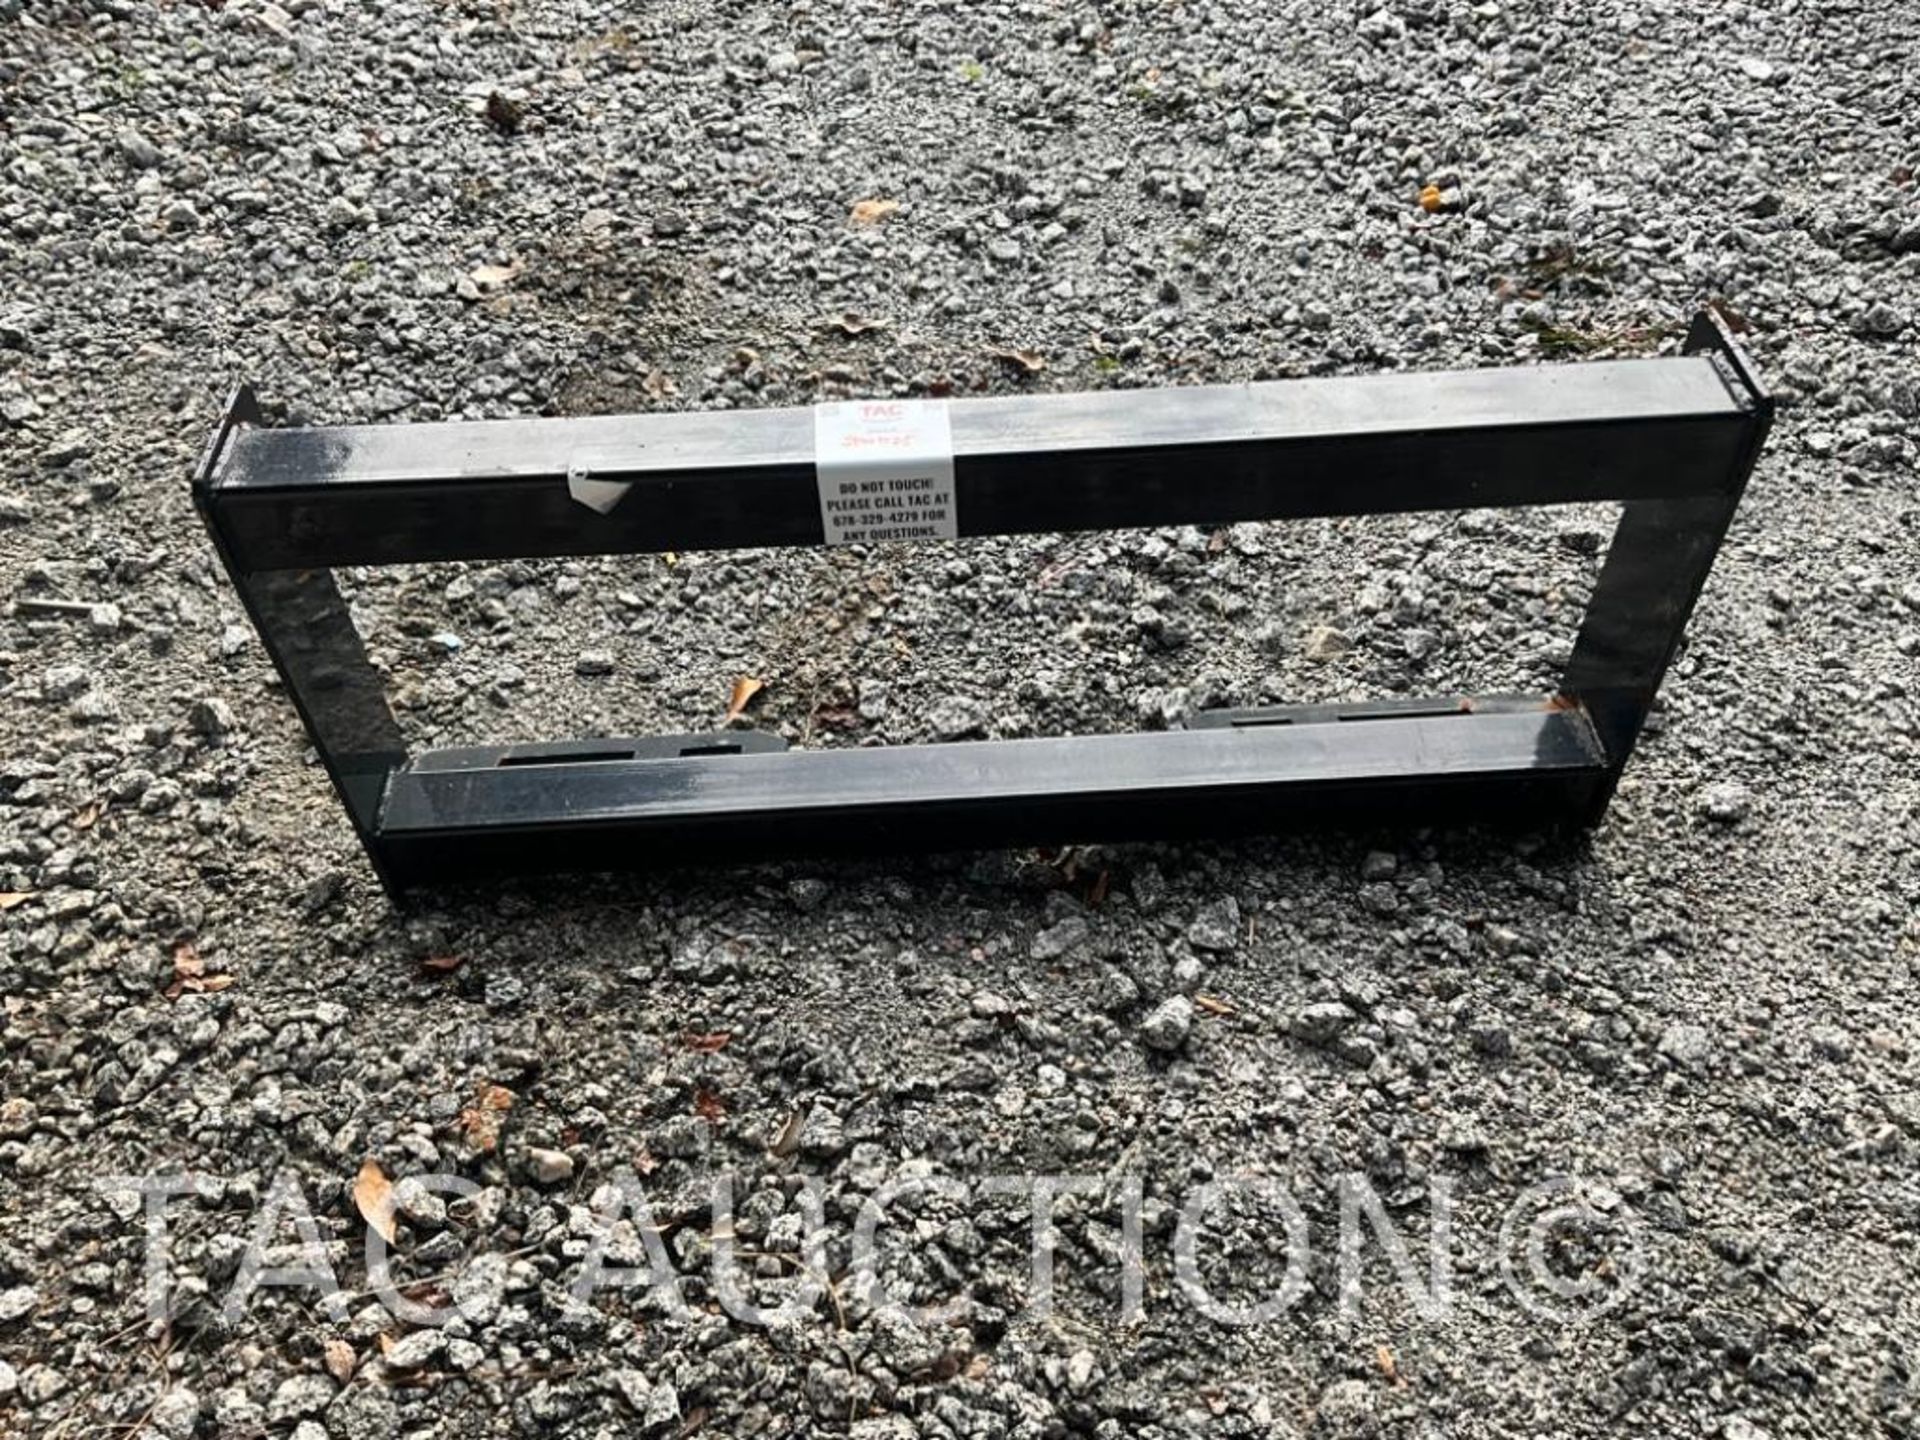 New Skid Steer Attachment Frame